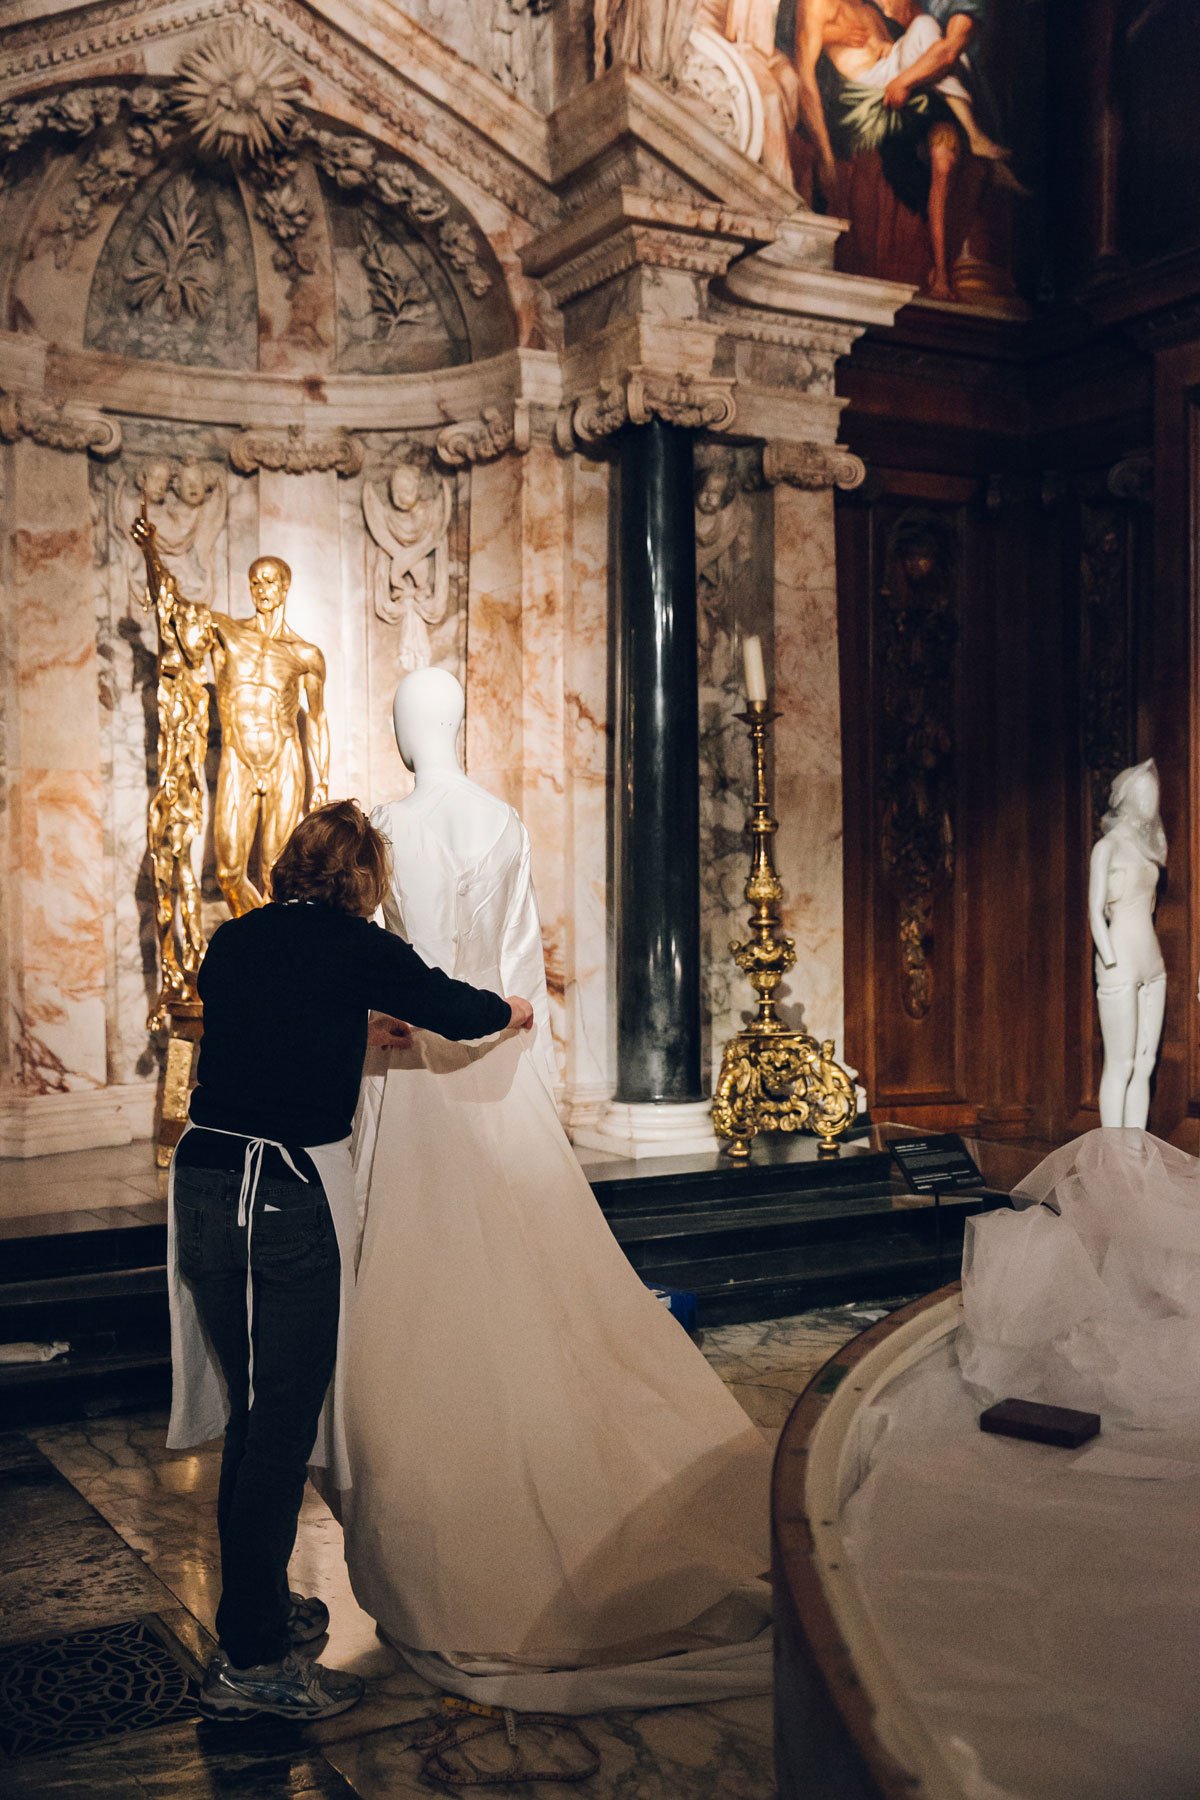 The making of "House Style: Five Centuries of Fashion at Chatsworth" exhibition. ​Photo © Chatsworth House Trust.